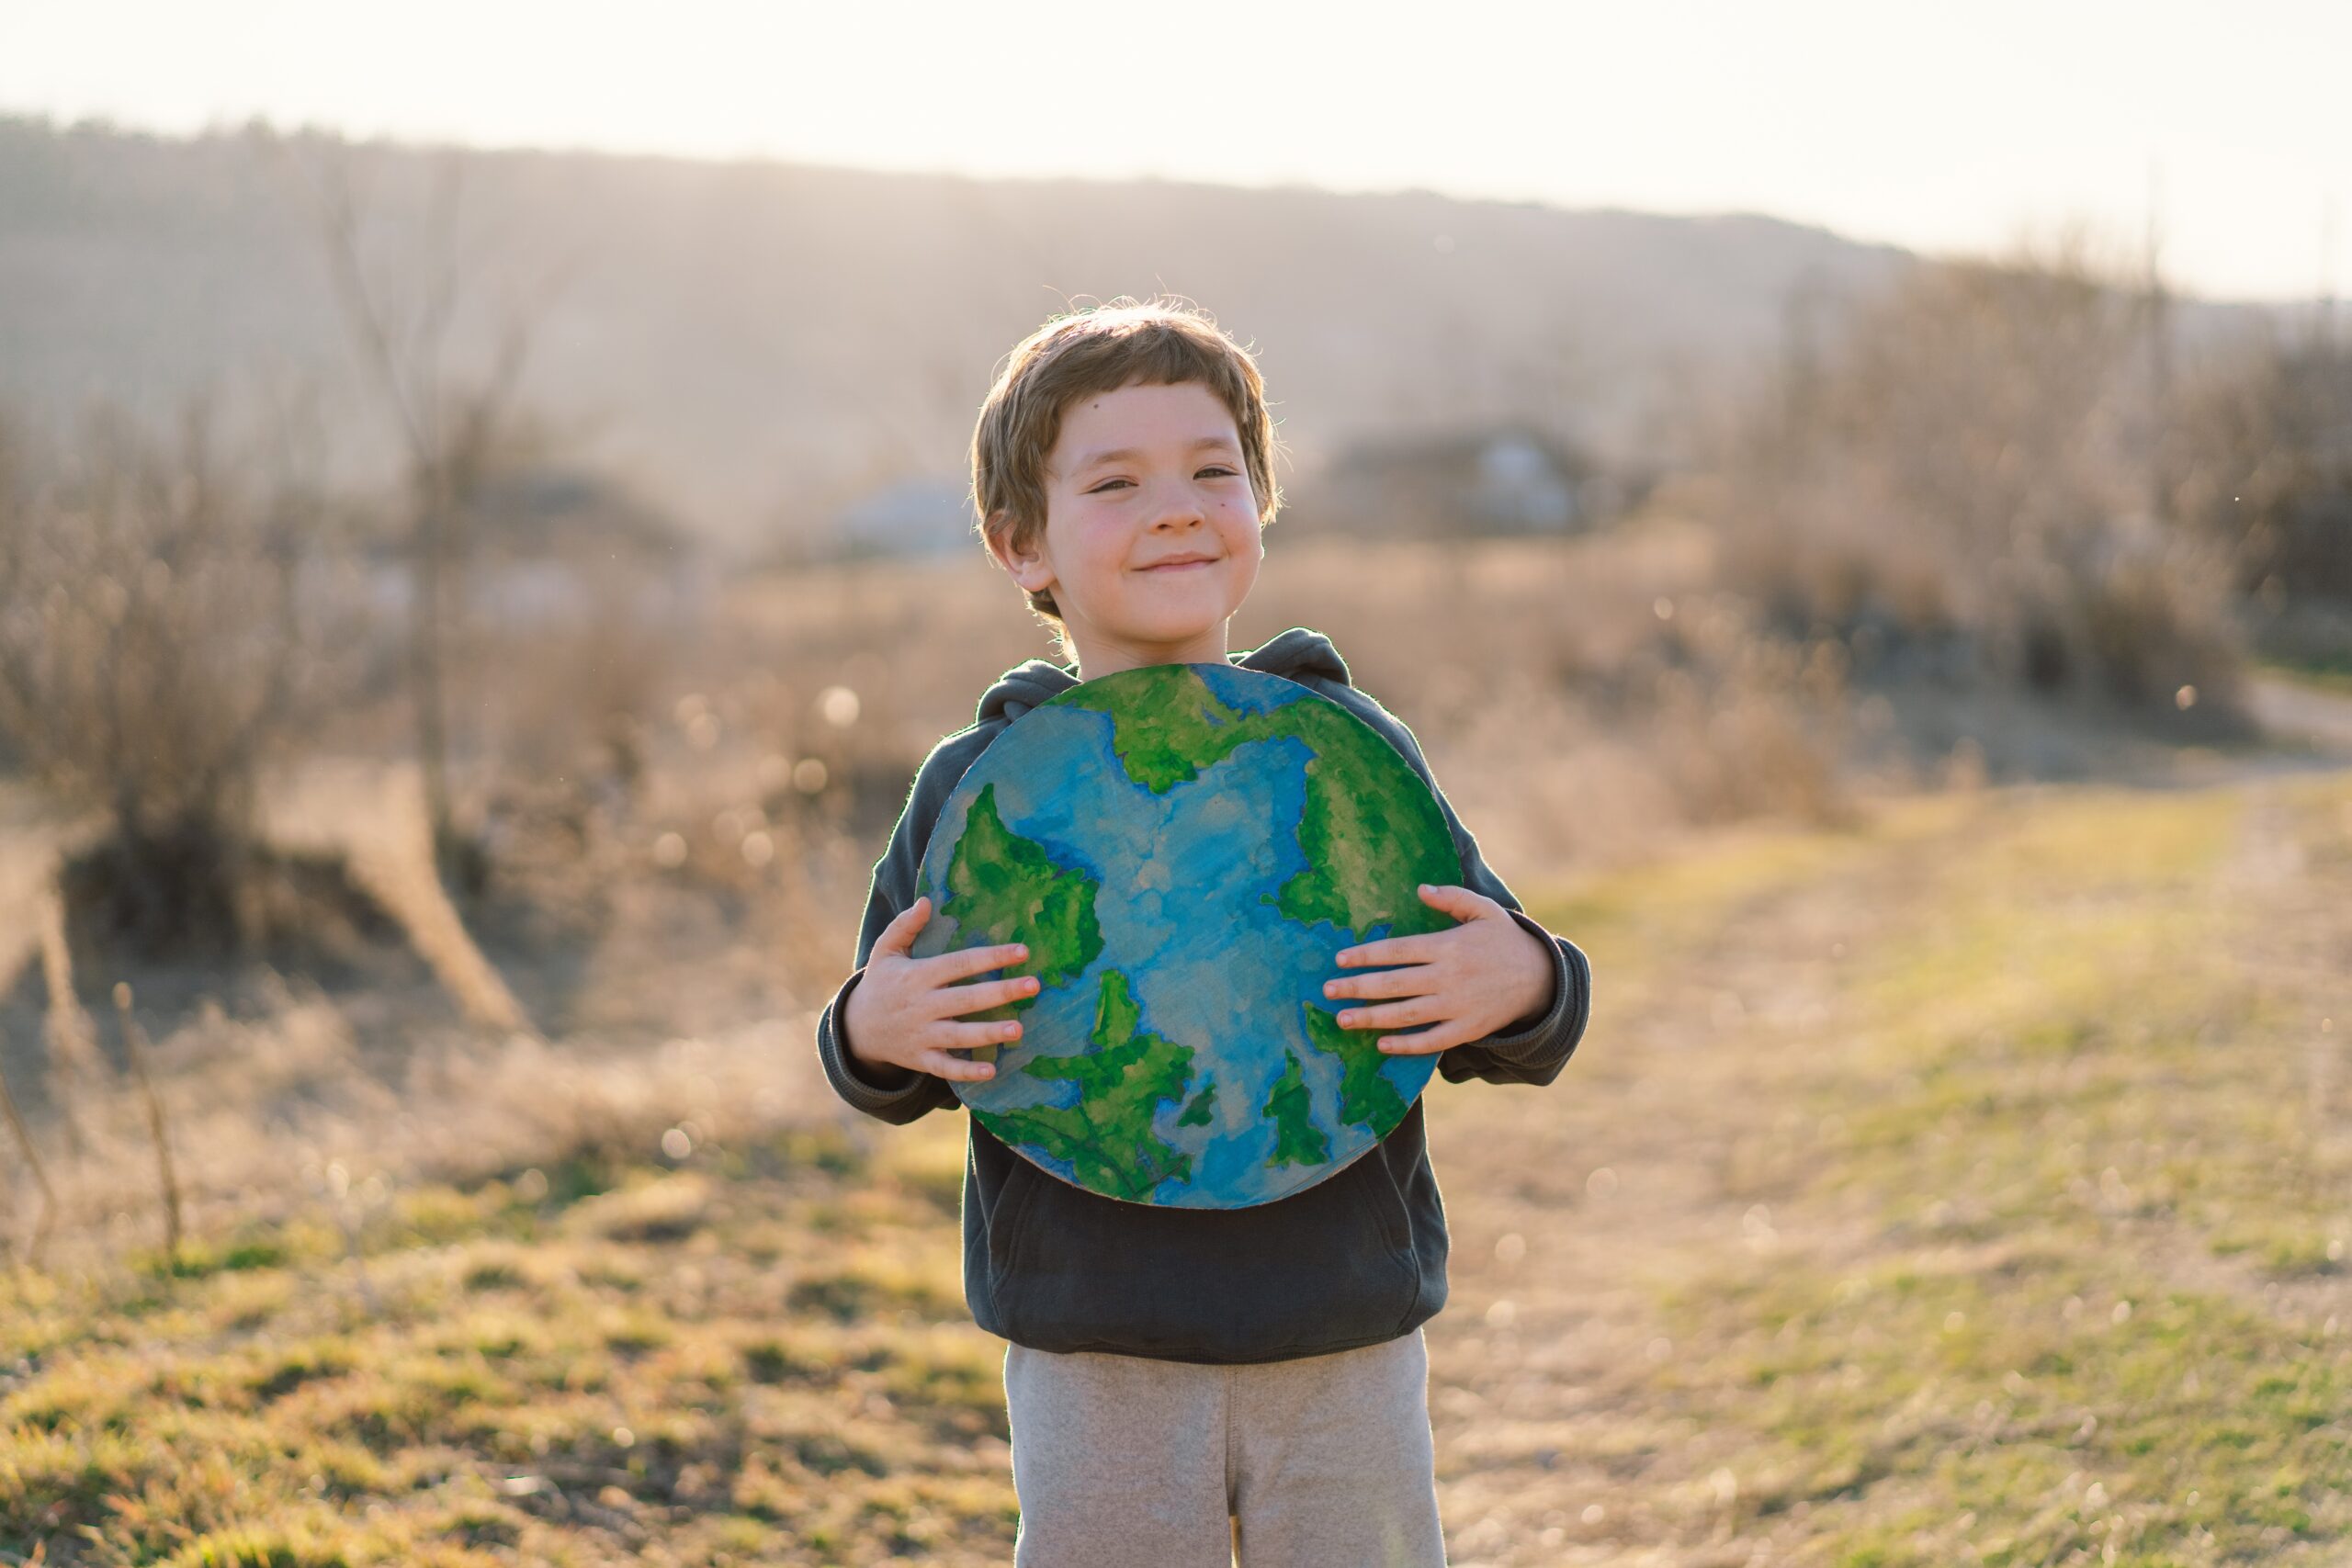 EARTH DAY EXPLORERS: ADVENTURES IN PROTECTING OUR PLANET